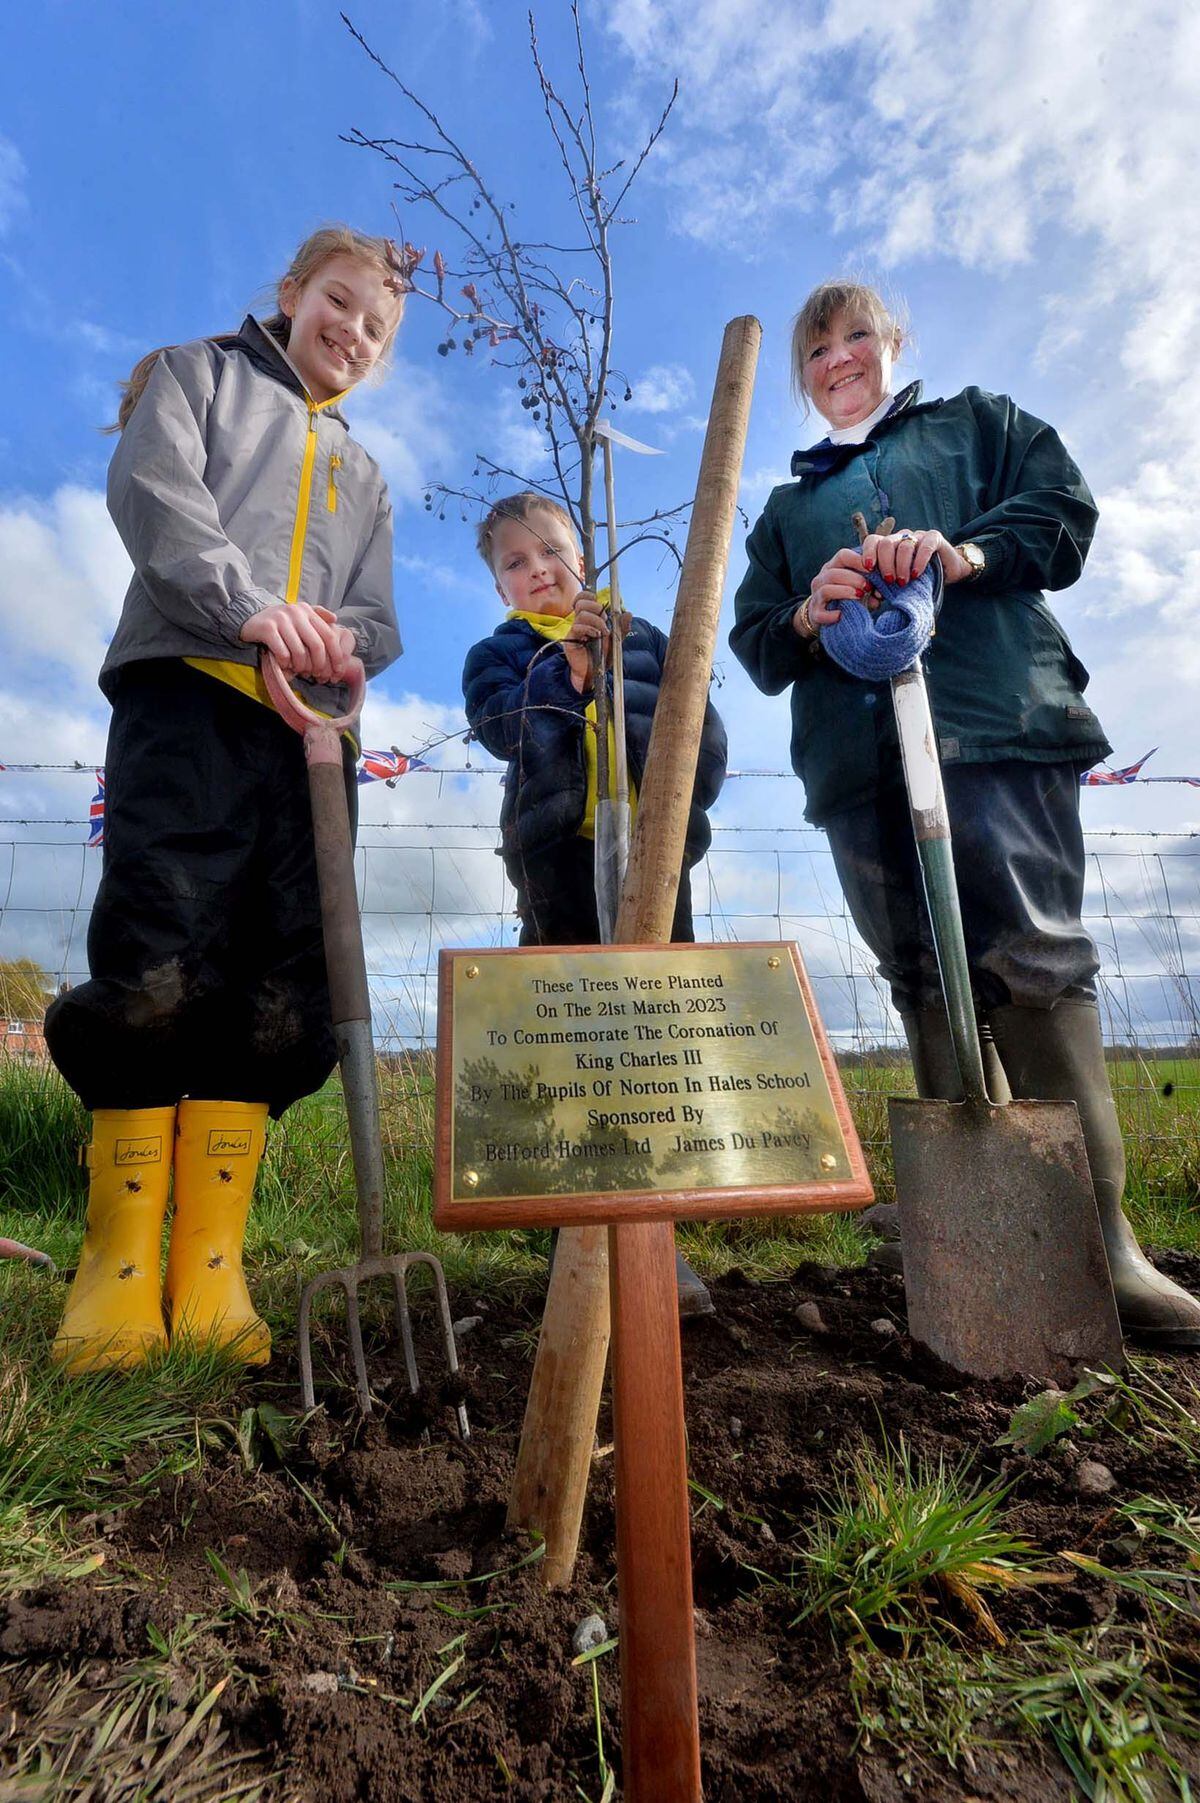 Norton in Hales pupils Evie and Jacob with Sarah Moulson, Chair of the In Bloom group, at the tree planting.